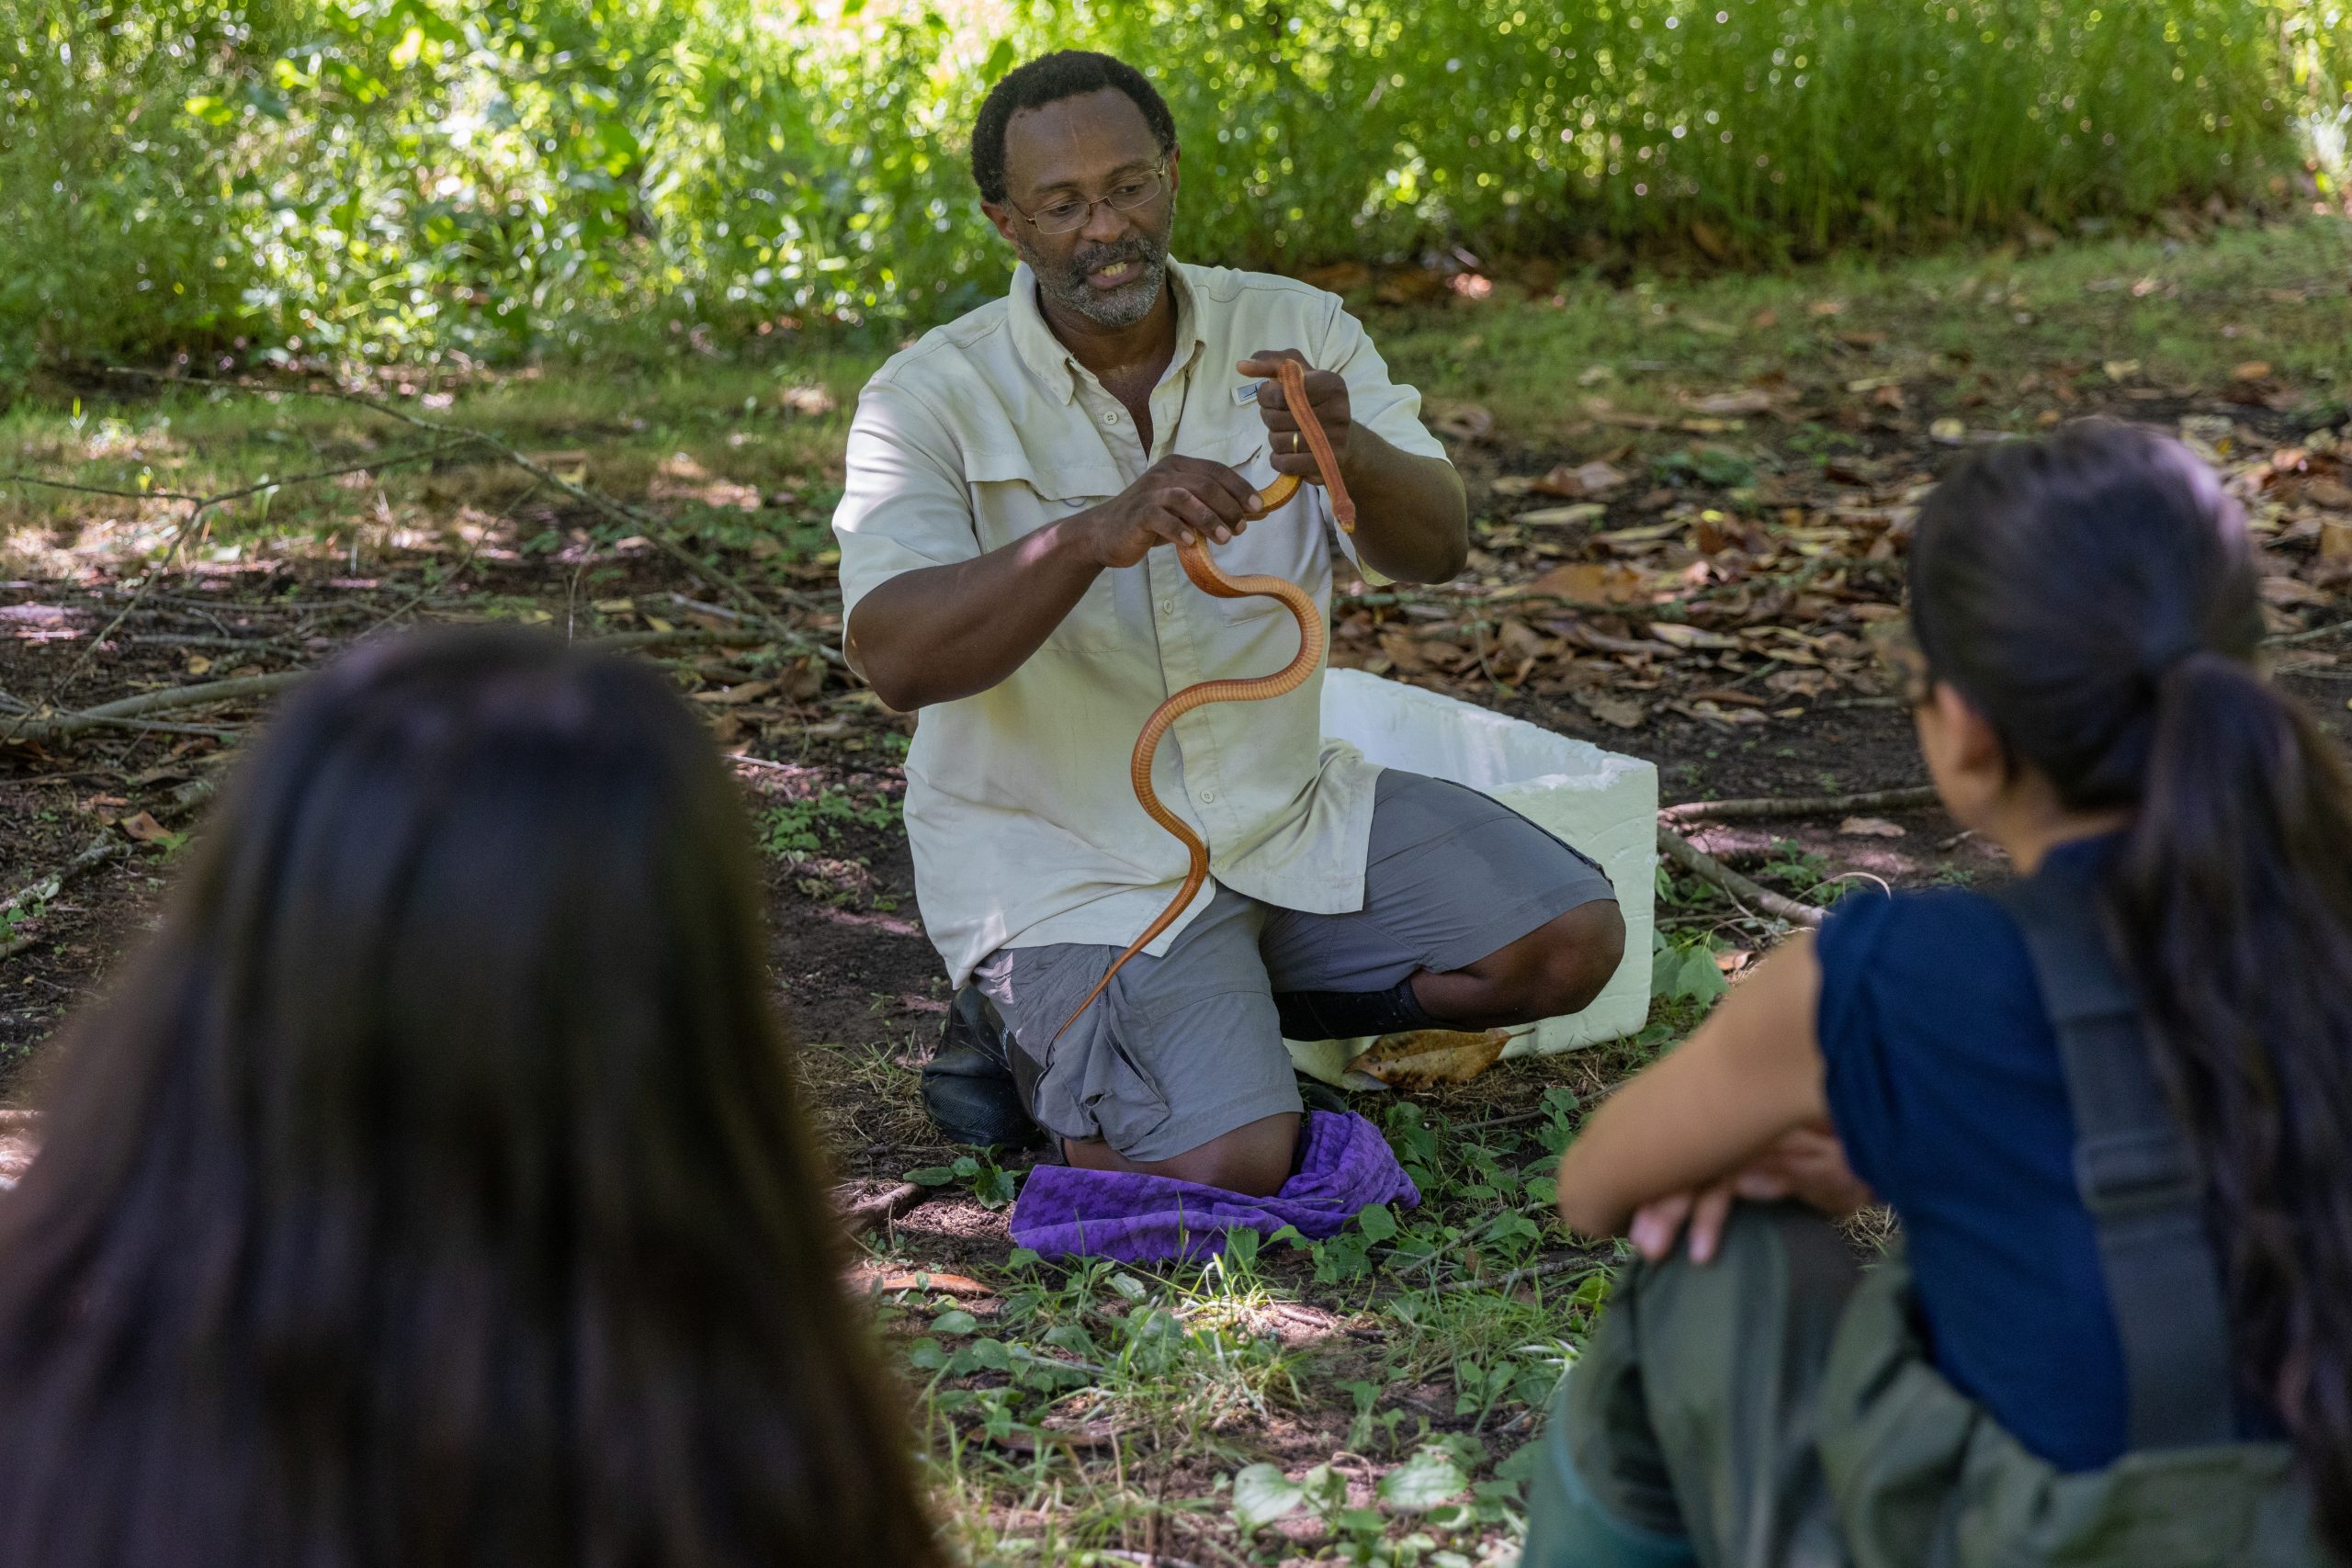 A professor holding and talking about a snake to some students outdoors